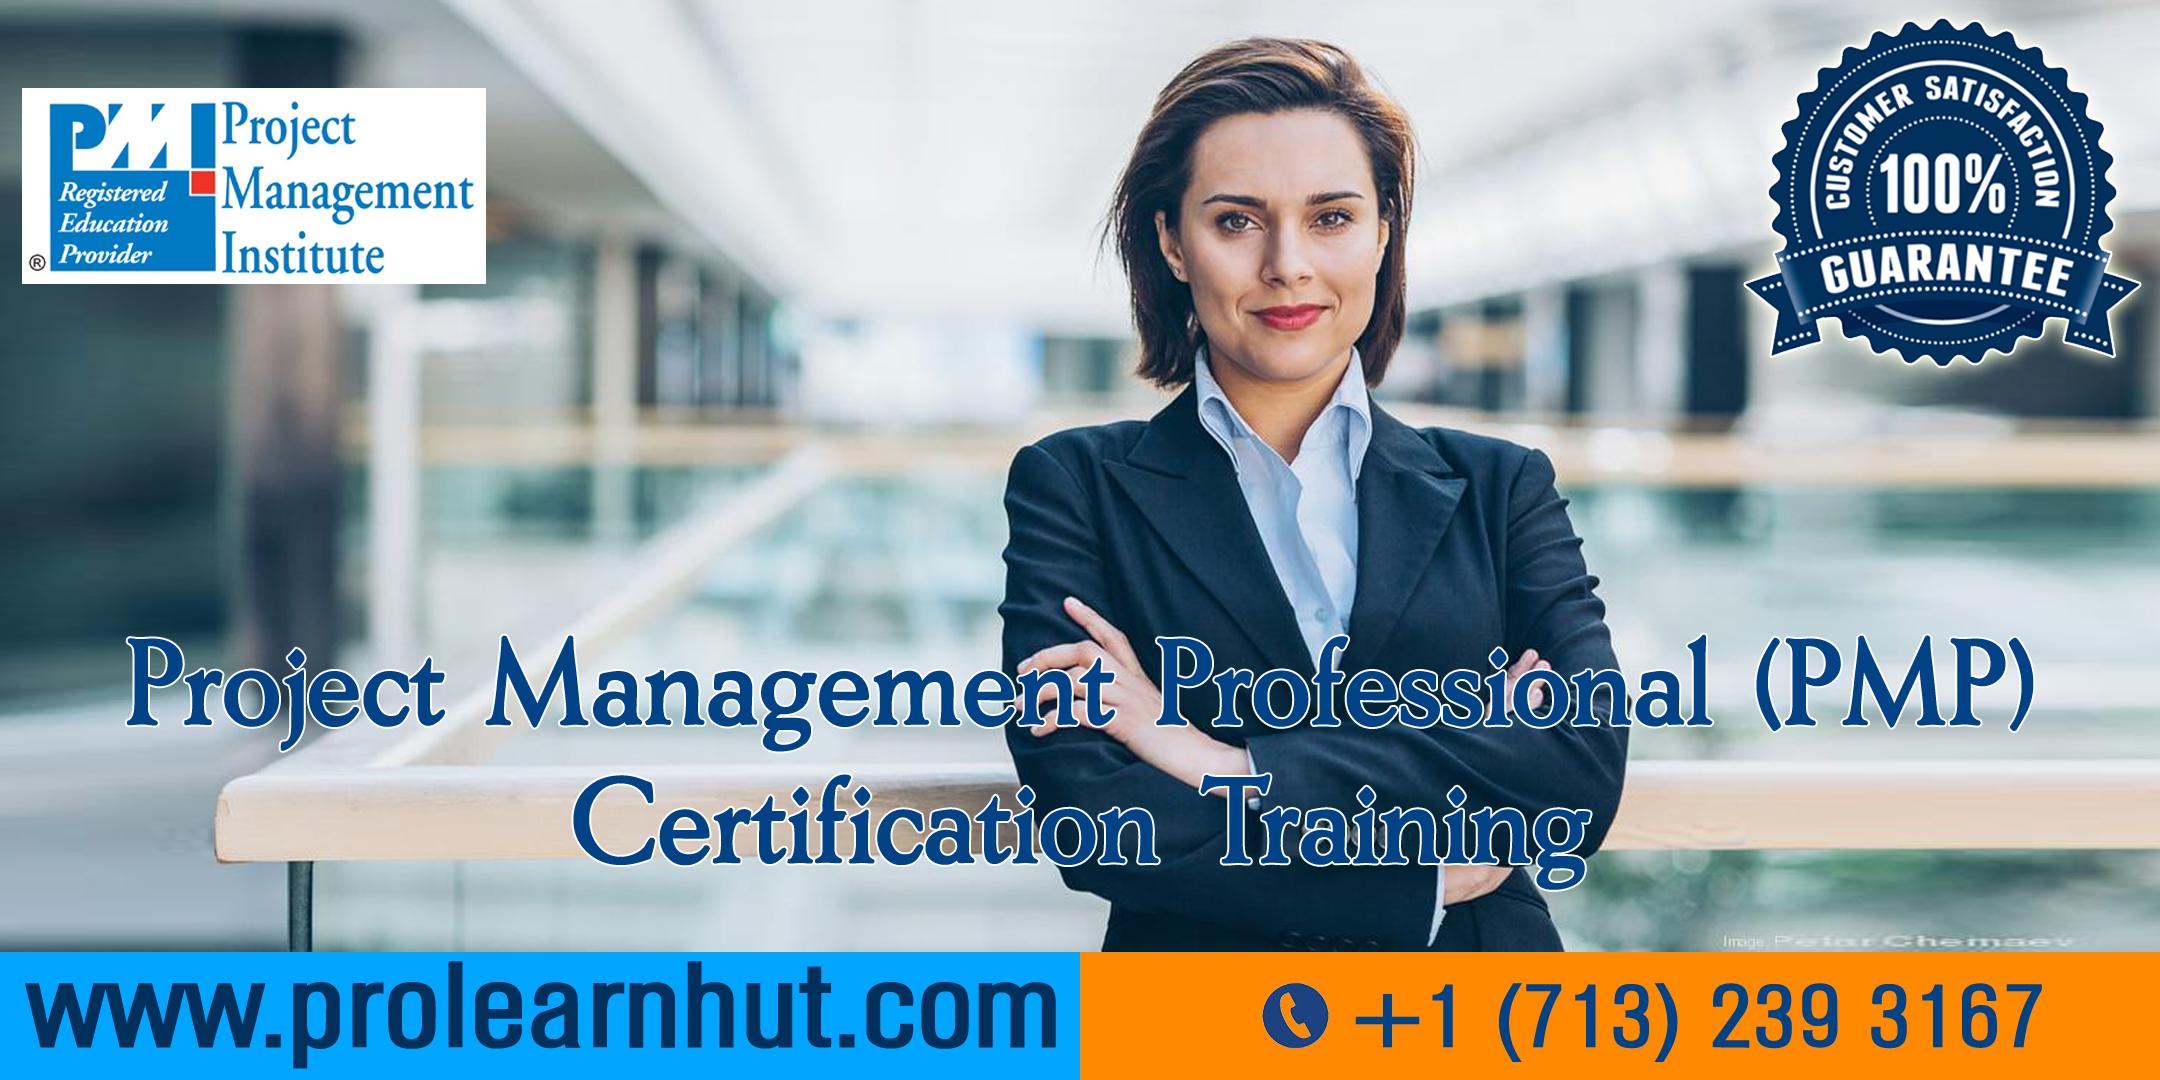 PMP Certification | Project Management Certification| PMP Training in Naperville, IL | ProLearnHut